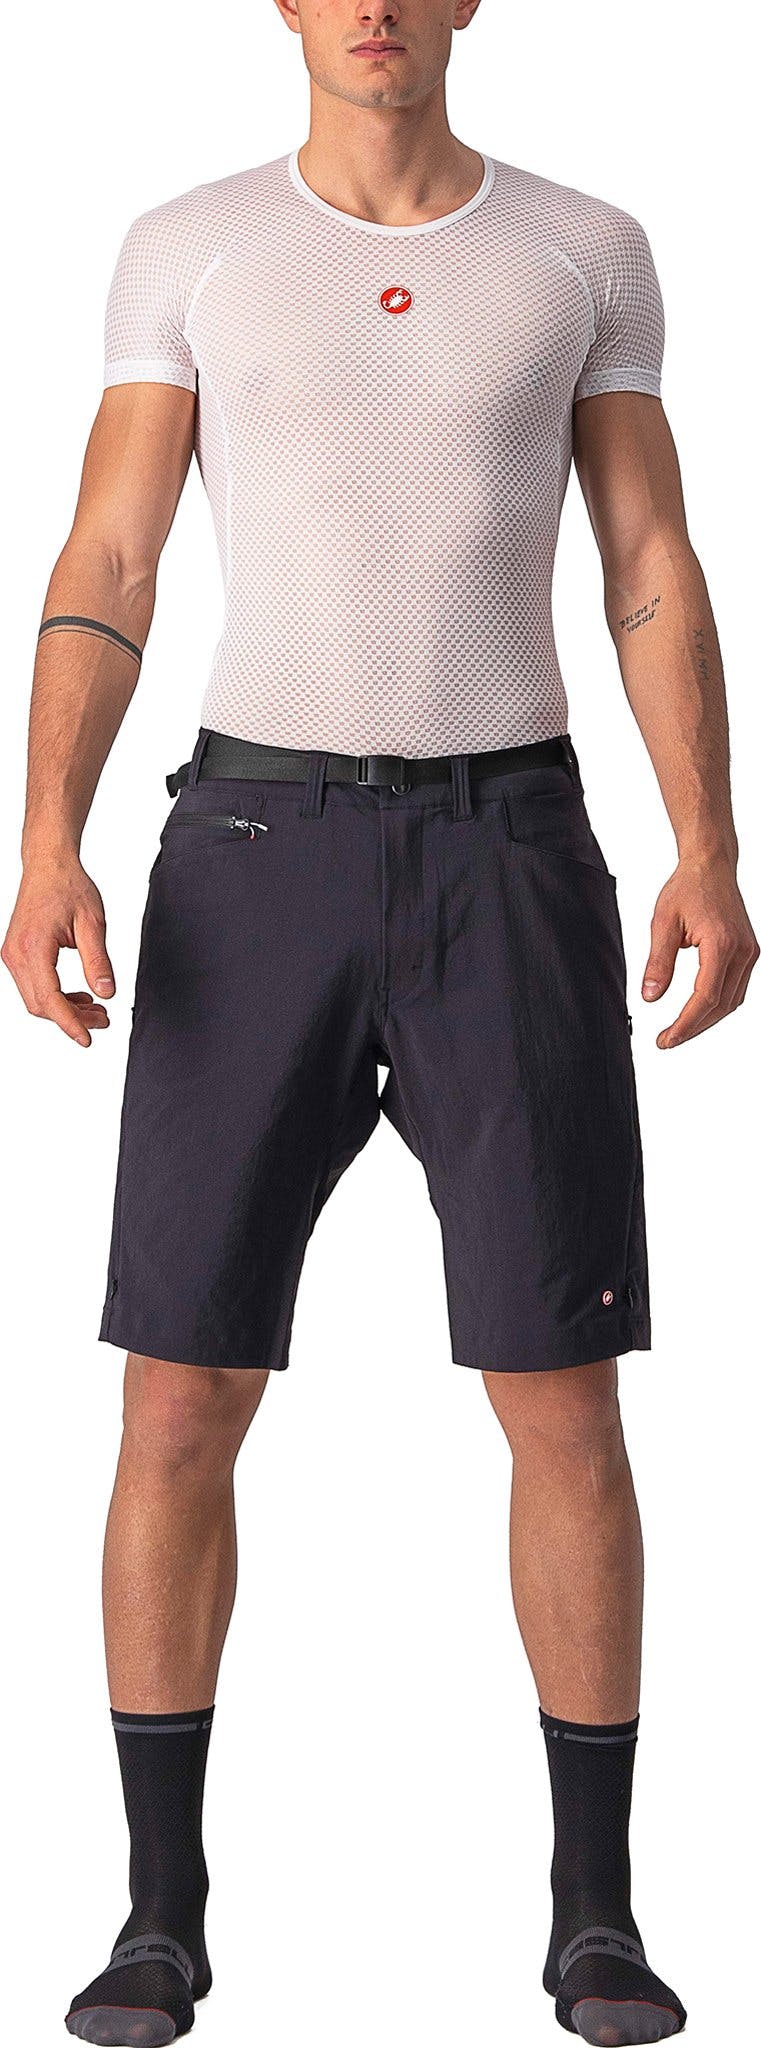 Product image for Unlimited Trail Baggy Short - Men's